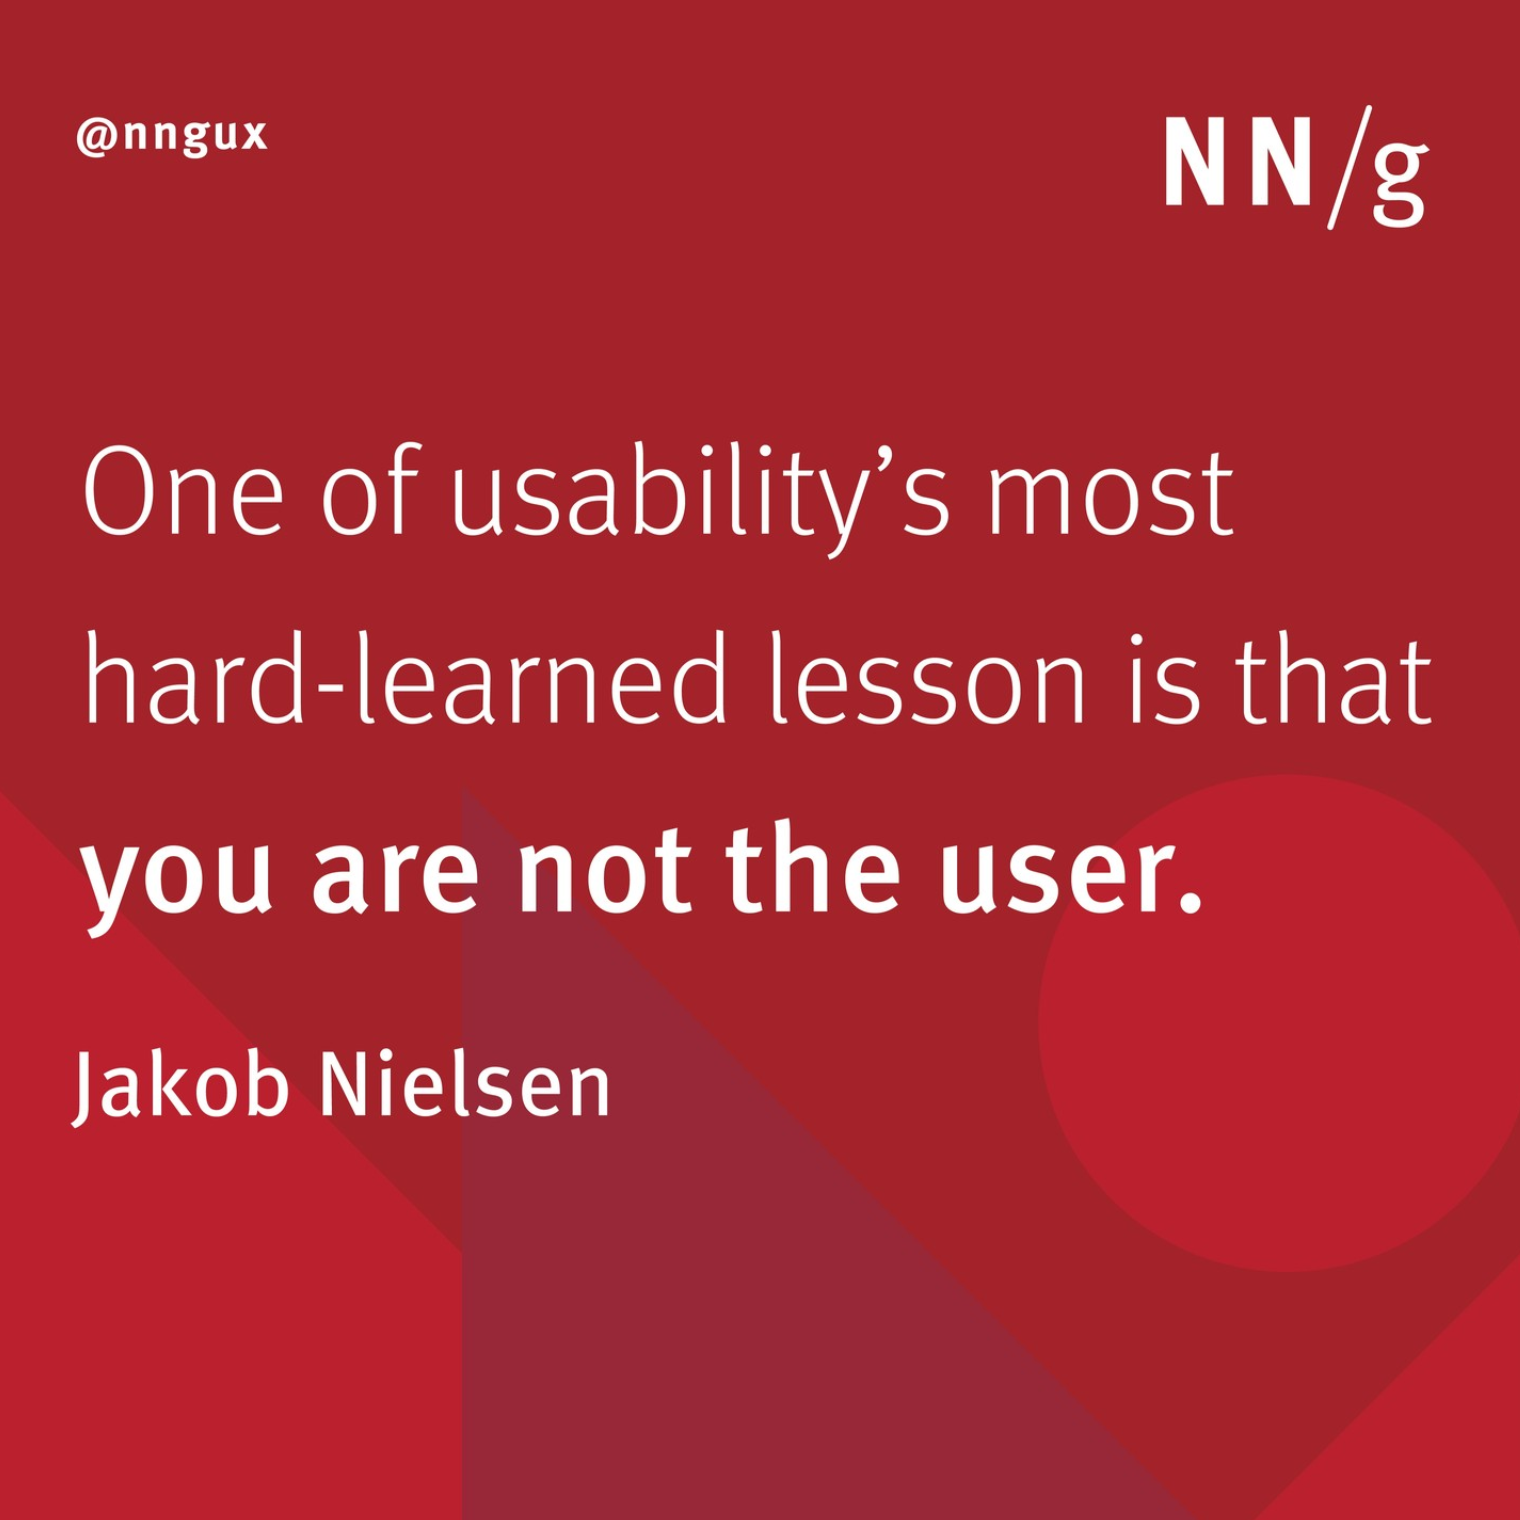 One of usability's most hard-learned lesson is that you are not the user. Jakob Nielsen